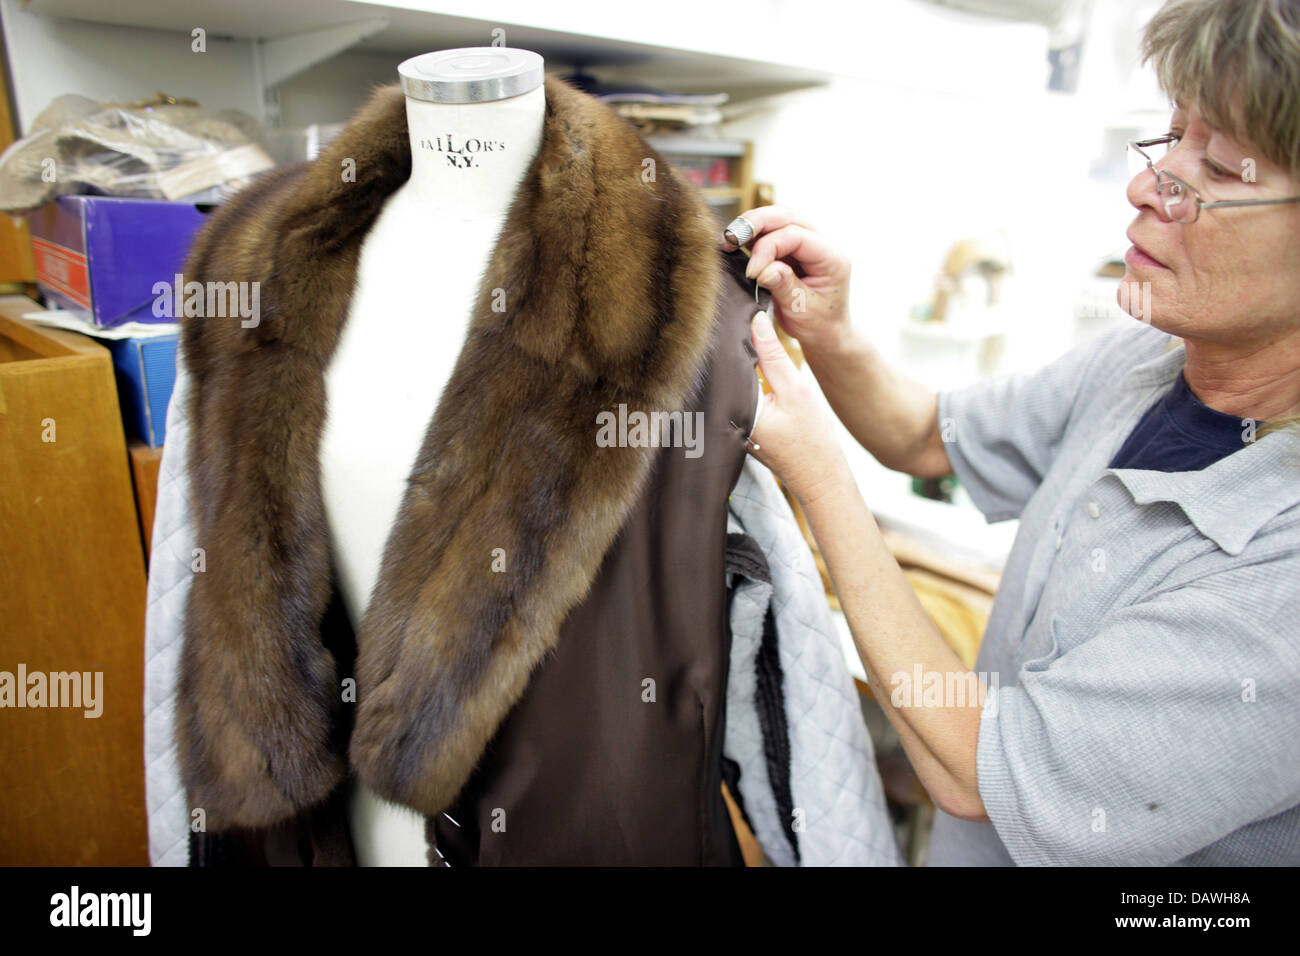 A staff member works on a sable fur coat in the 'Slupinski' fur fashion factory on Koenigsallee in Duesseldorf, Germany, 12 January 2007. The Slupinski brothers create individual items for their worldwide customers in Duesseldorf or St. Moritz. Photo: Rolf Vennenbernd Stock Photo